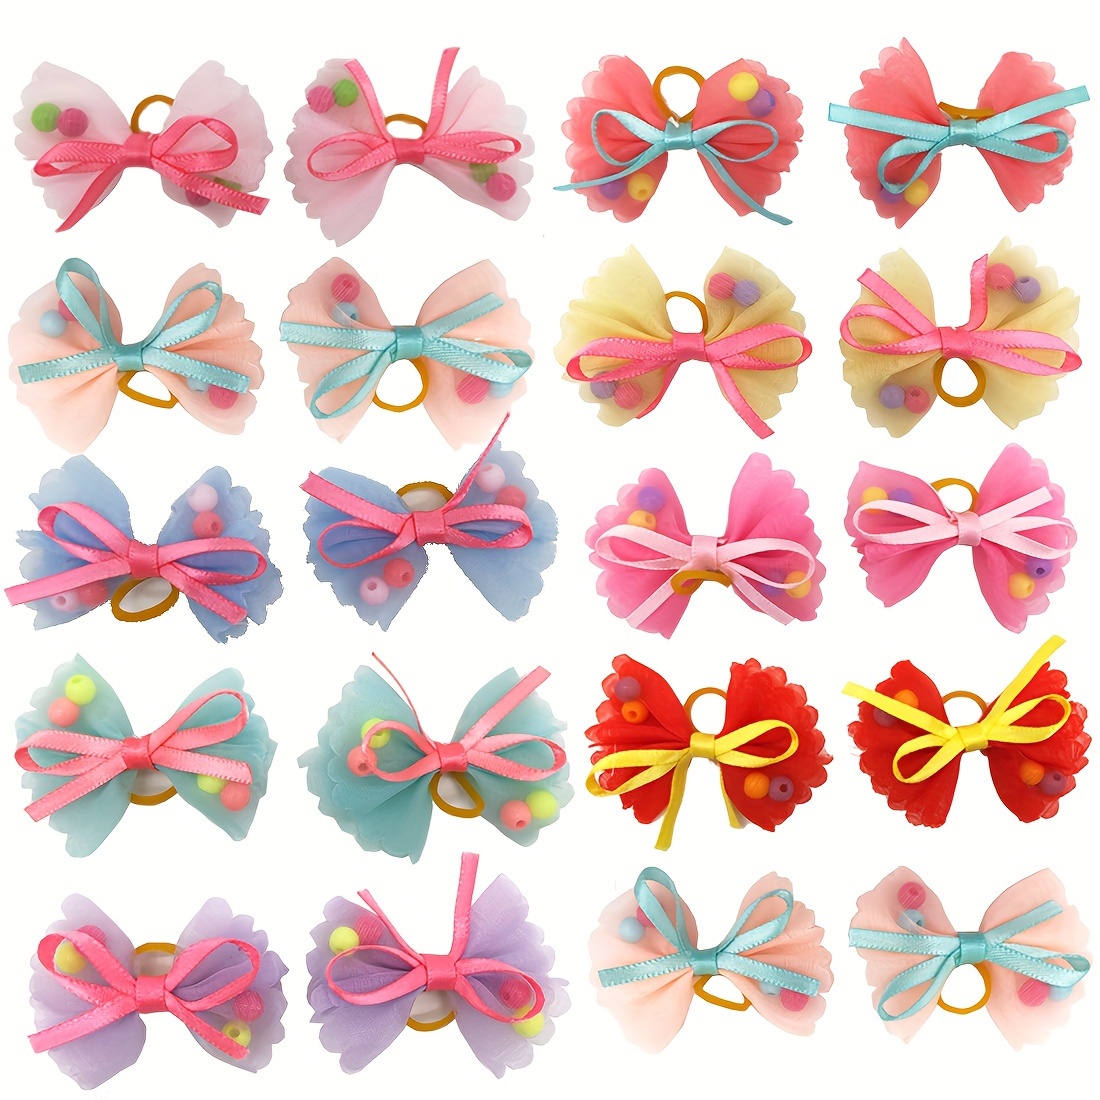 

20-pack Mixed Pet Hair Bows, Patterned Dog Head Accessories, Butterfly Knot Pet Hair Flowers, Dog Hairbands - Assorted Colors